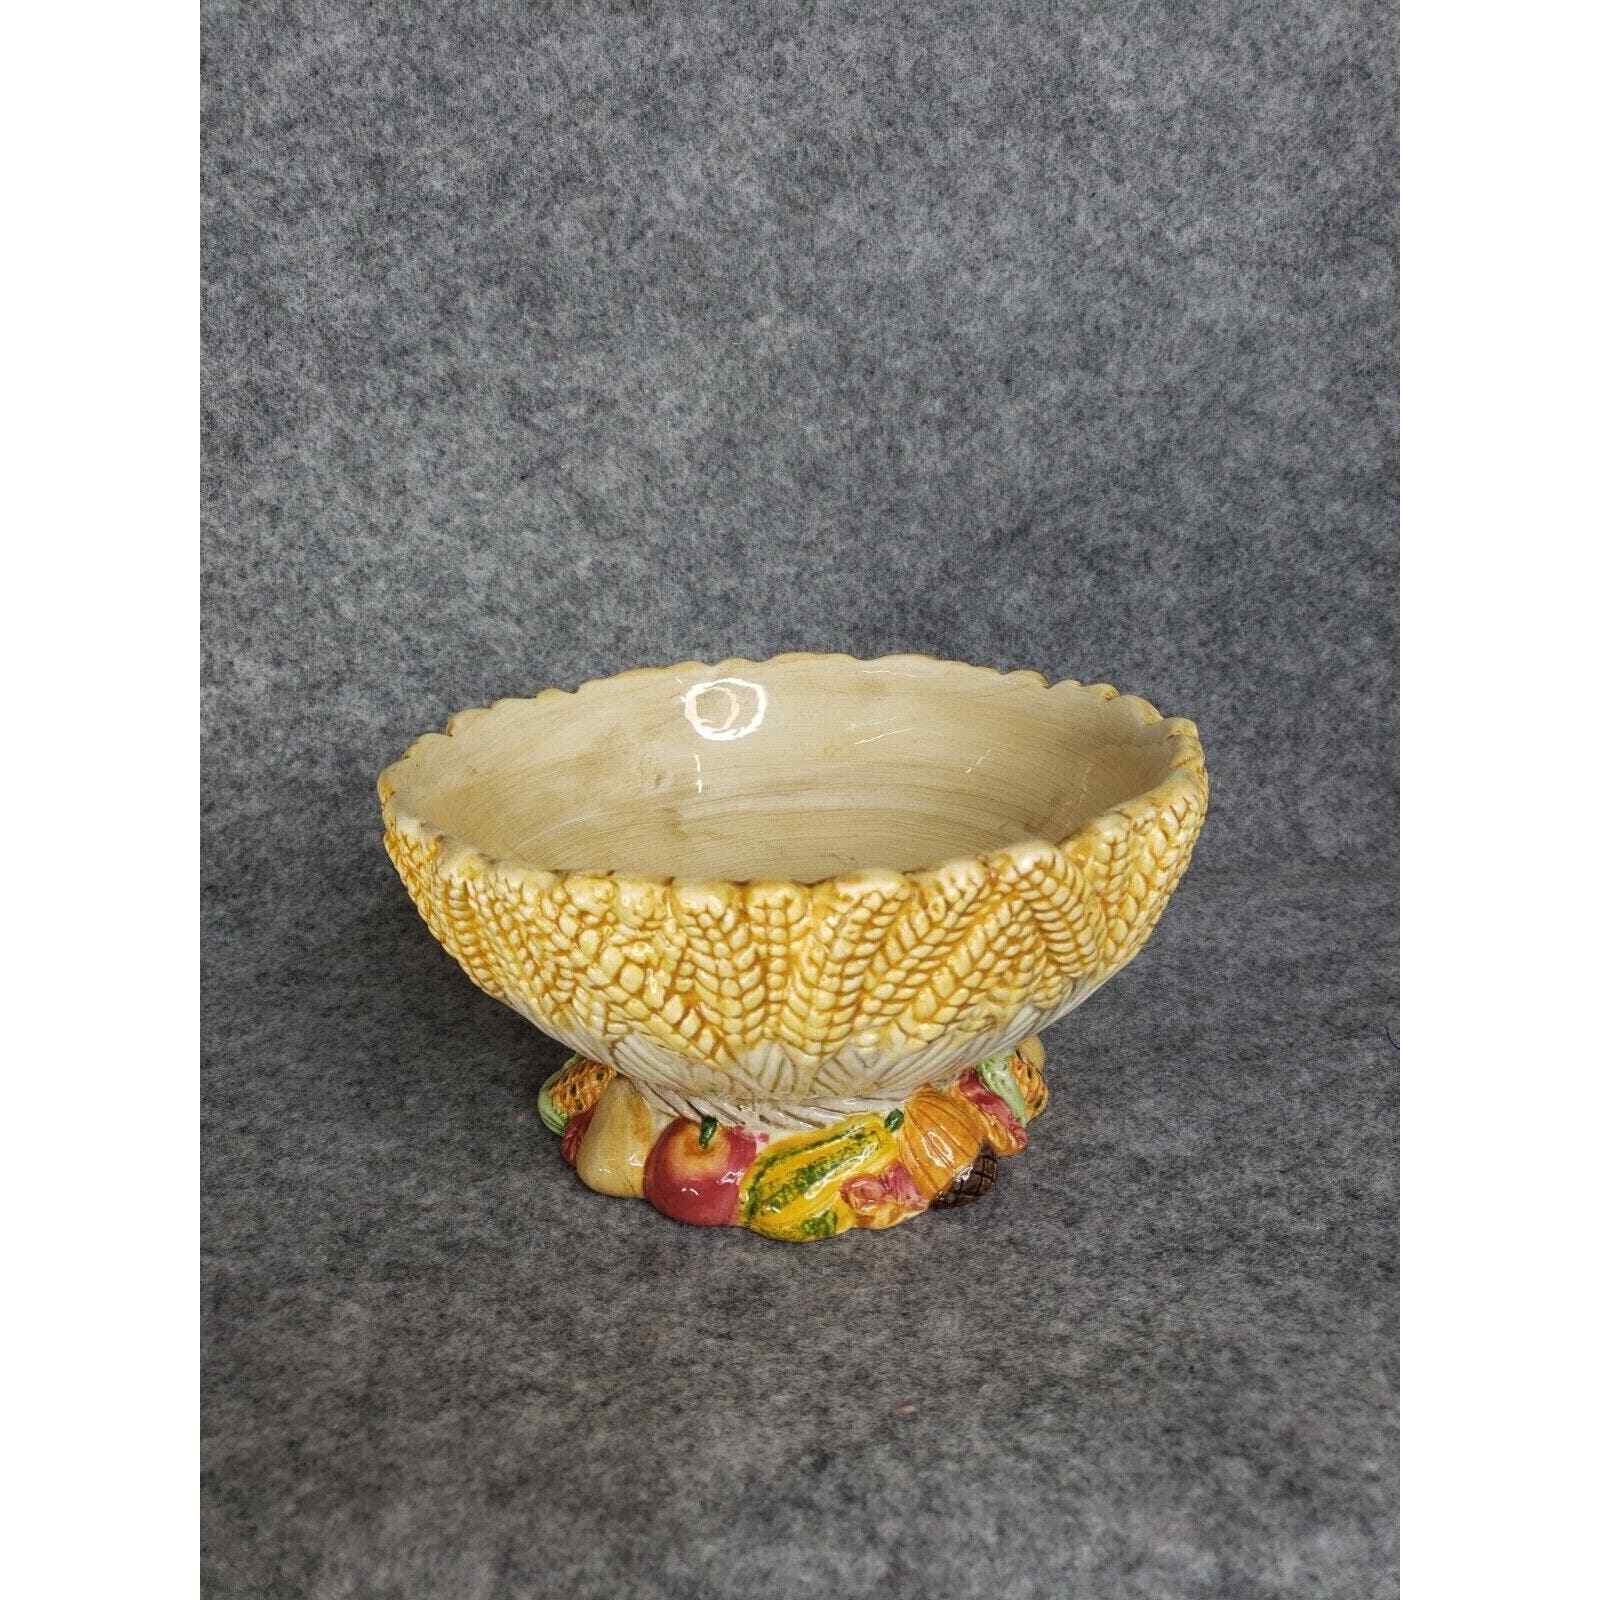 Vintage WCL Ceramic Footed Bowl Wheat Outer Fruit on Bottom Harvest Fruit Bowl